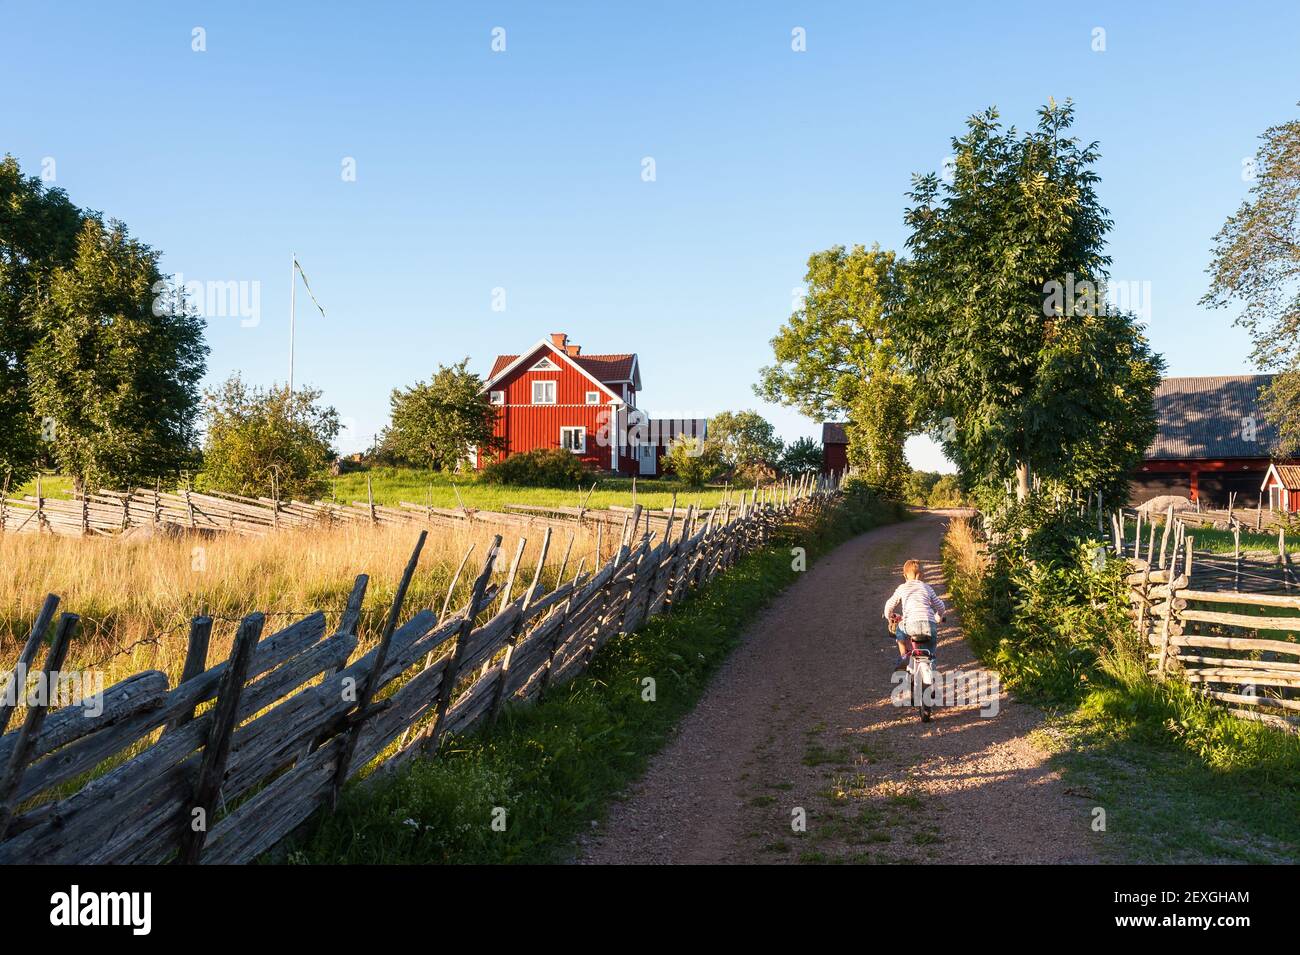 Child riding a bike in rural Sweden Stock Photo